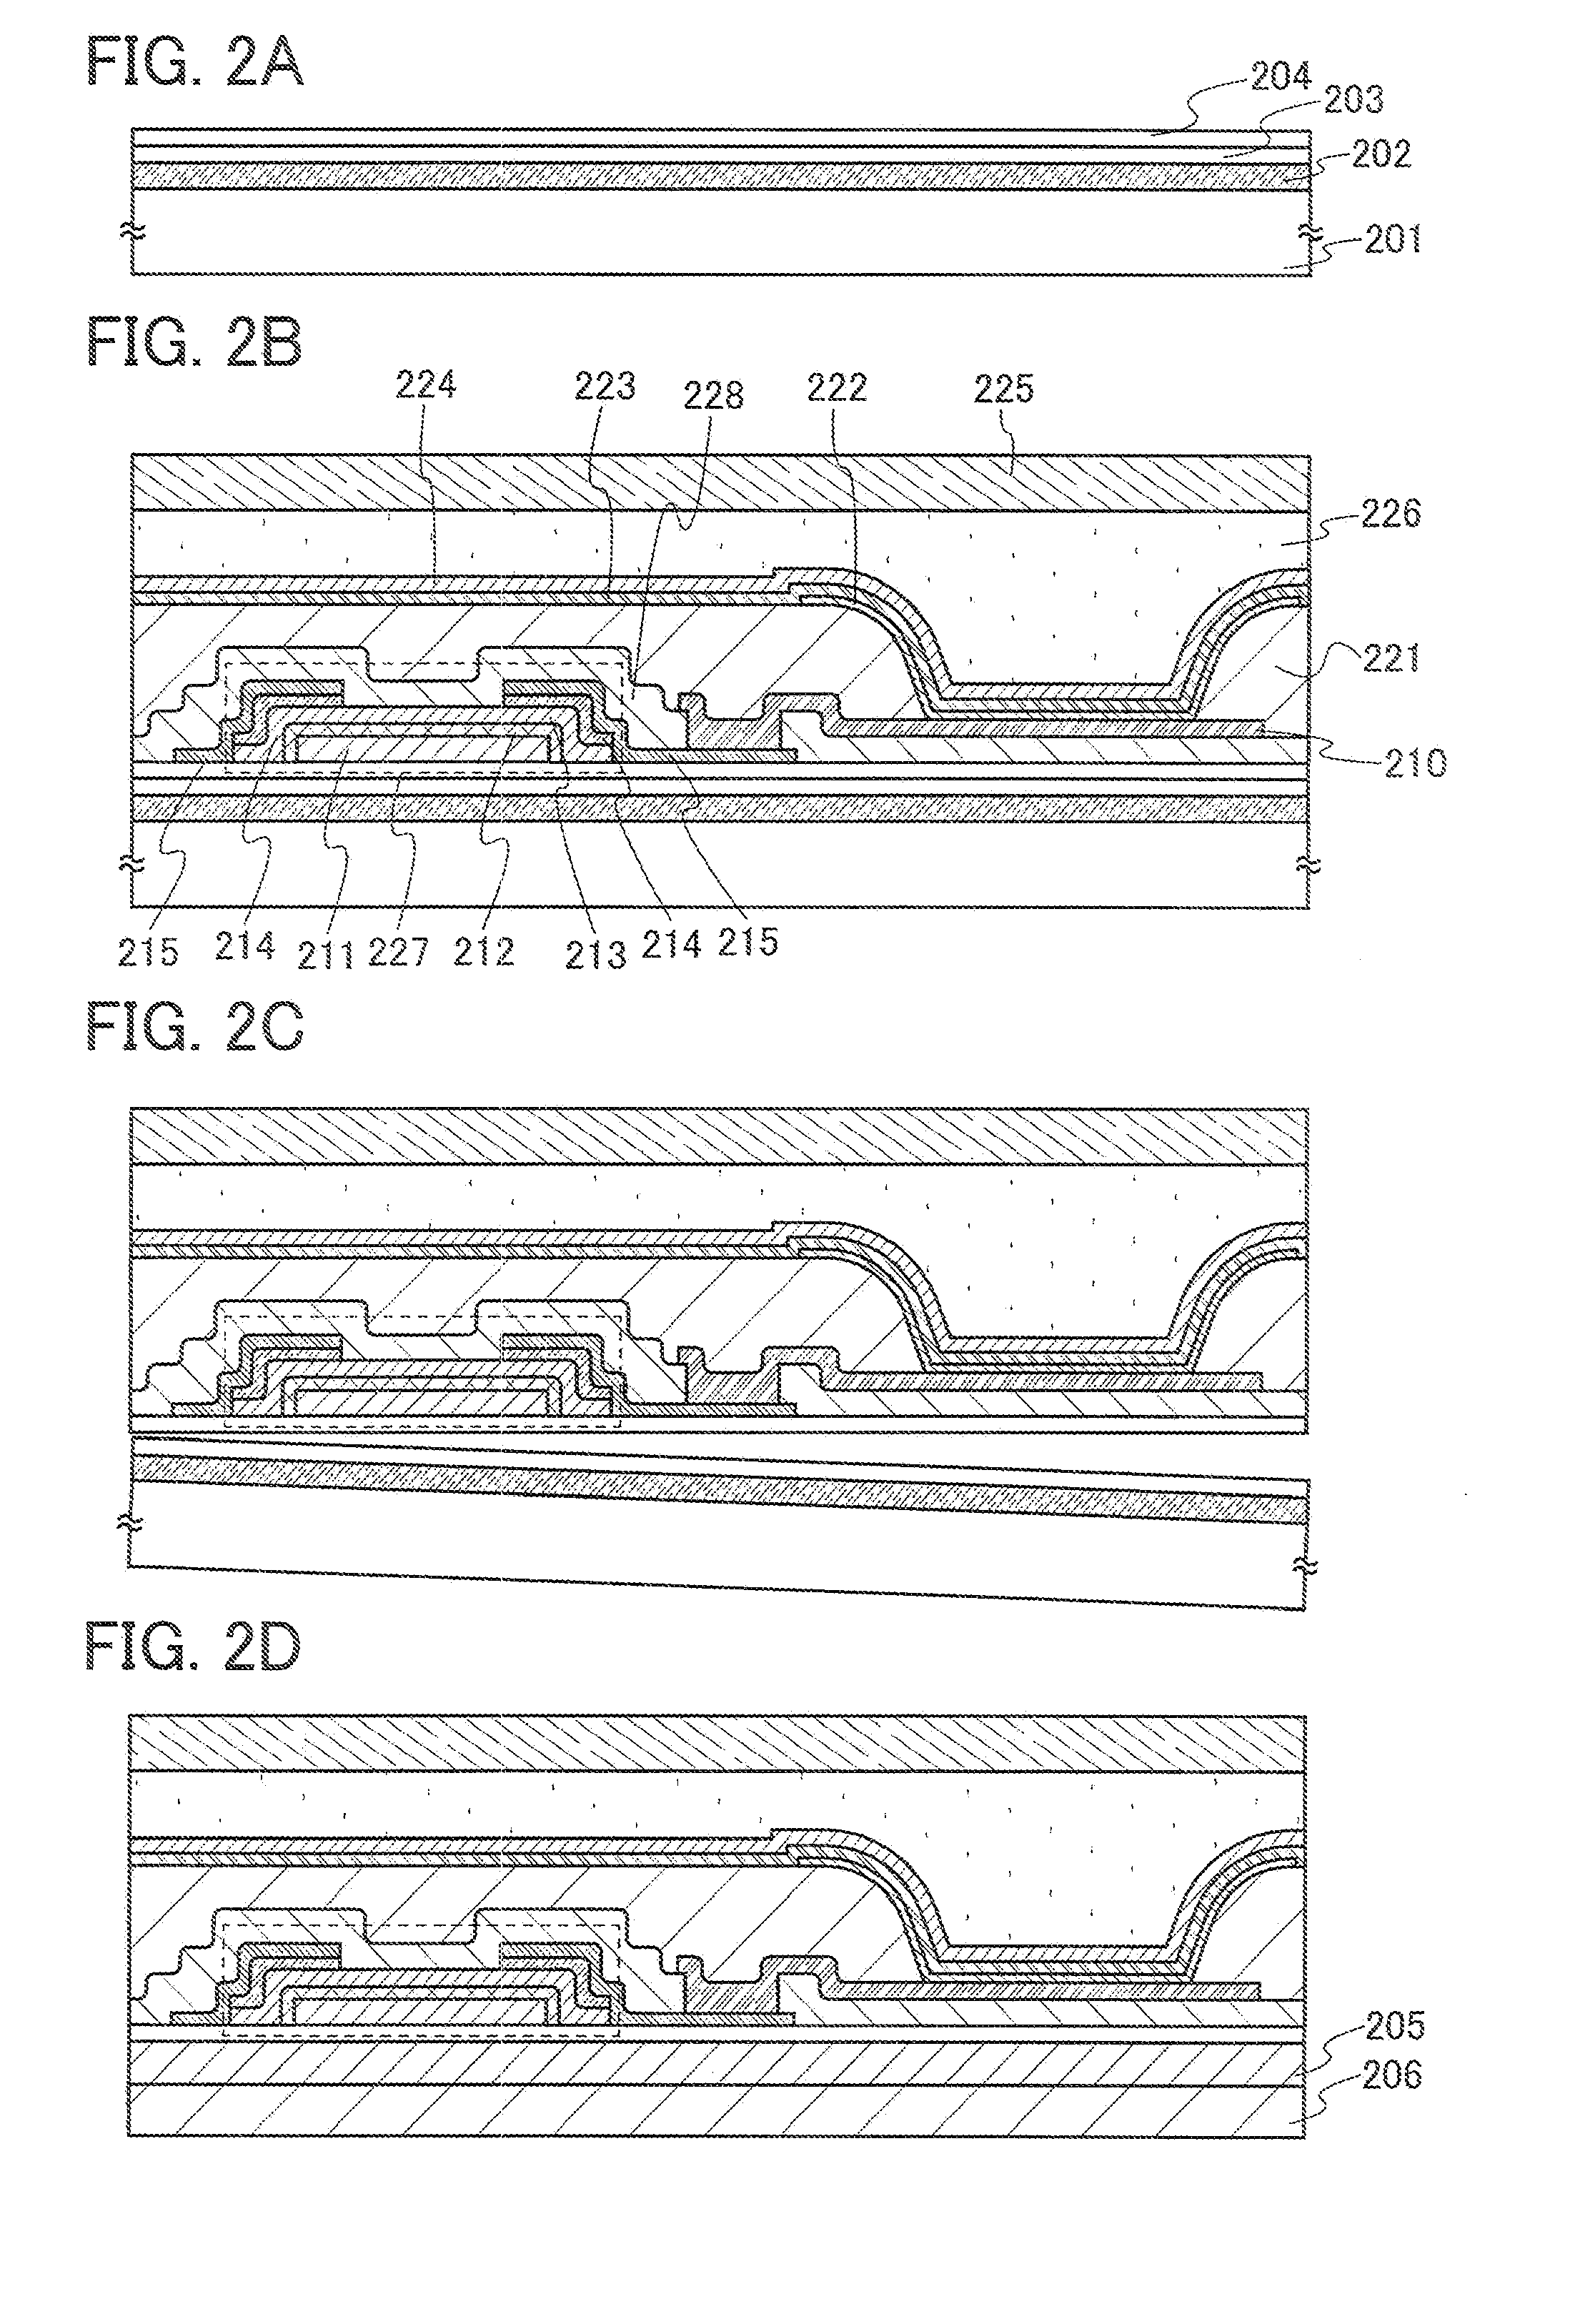 Method for manufacturing a semiconductor device using a flexible substrate